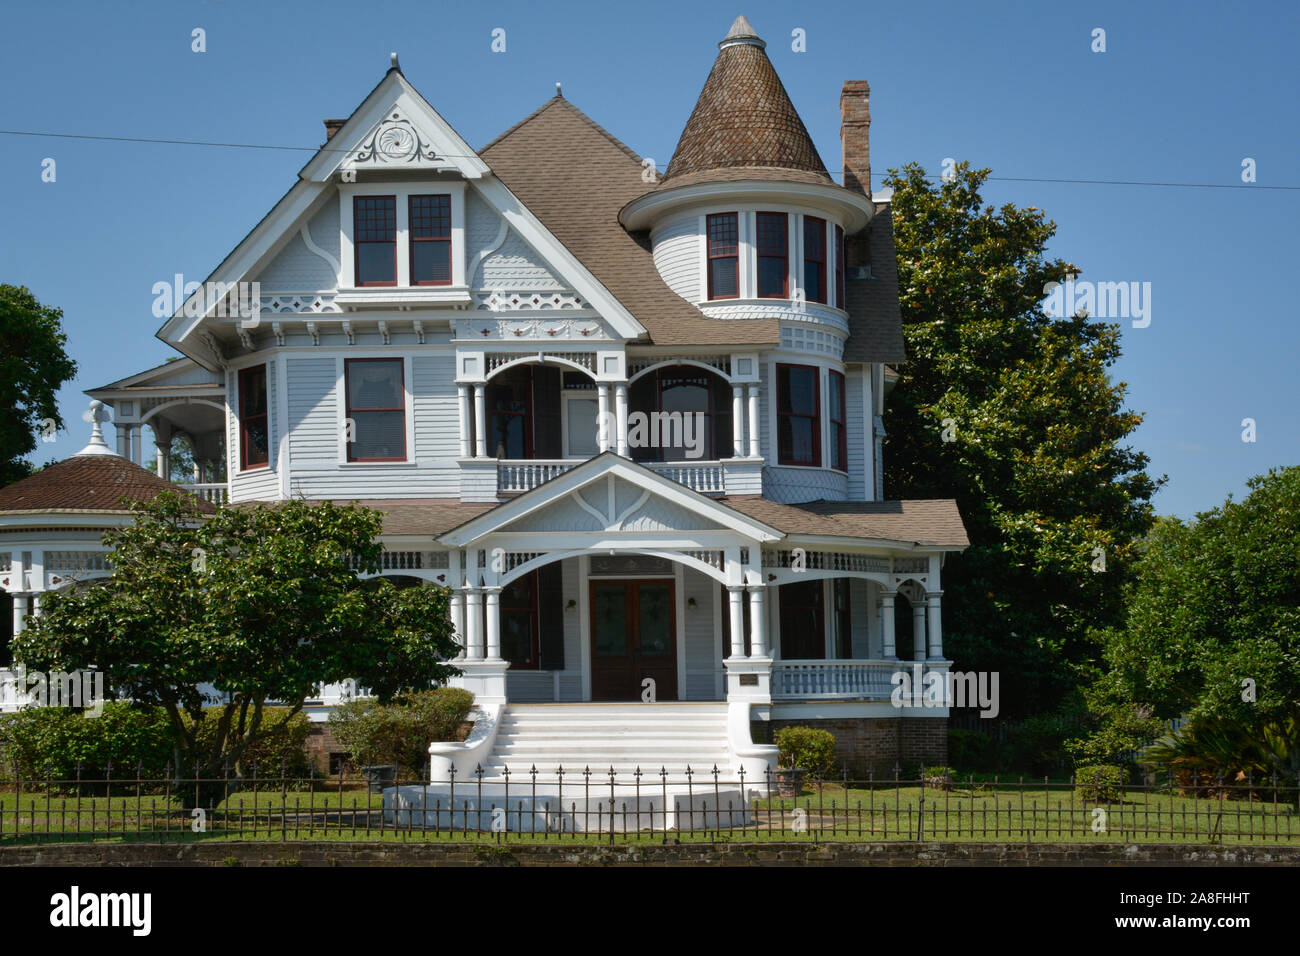 A beautiful example of a vintage Queen Anne house, with it's roofs and turret, now the Deakle Law Firm, in Hattiesburg, MS, USA Stock Photo